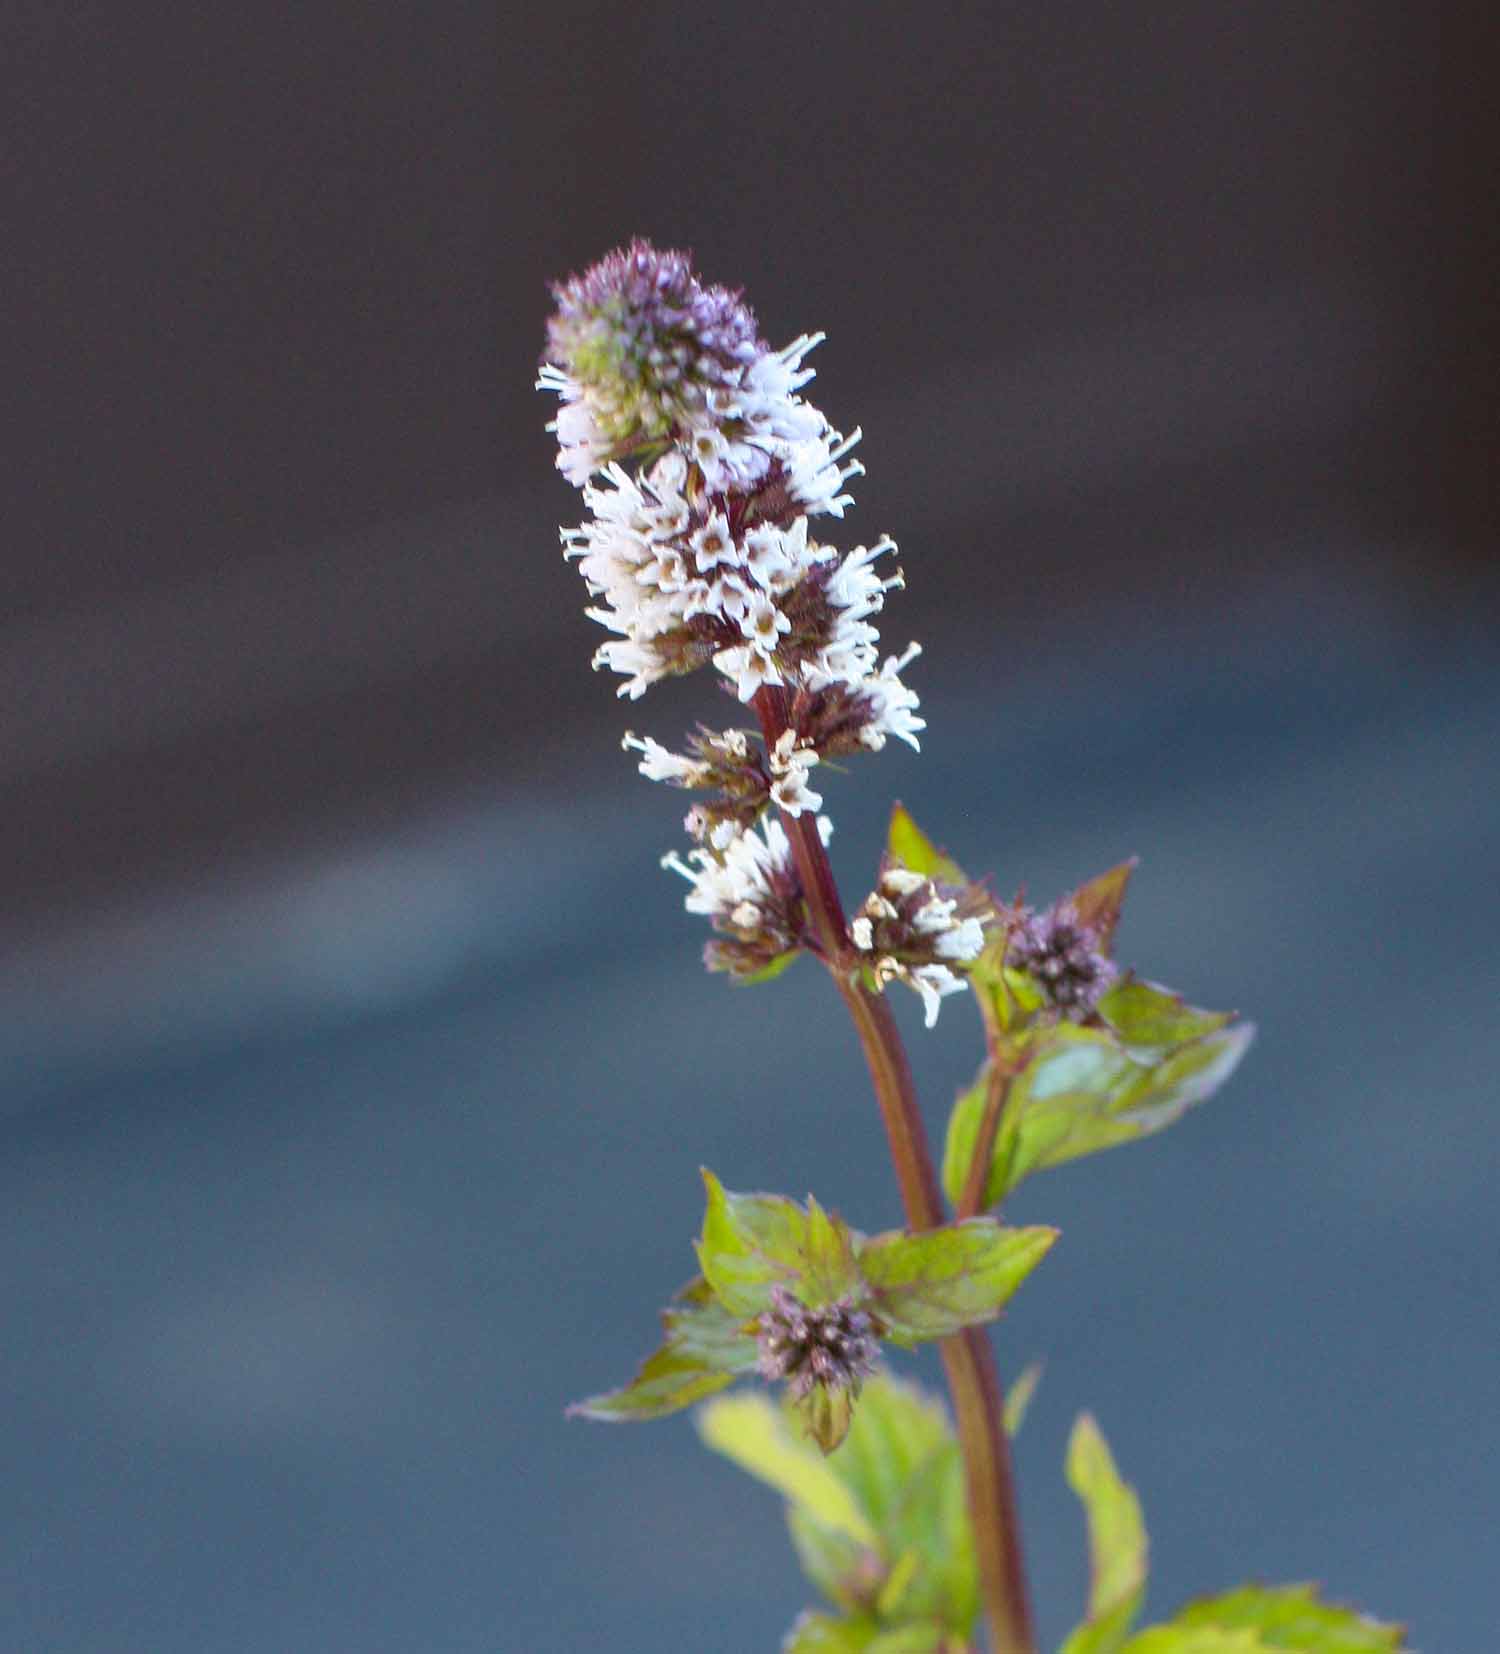 Close-up of a flower on a peppermint plant, with small white blooms and purple leaves.